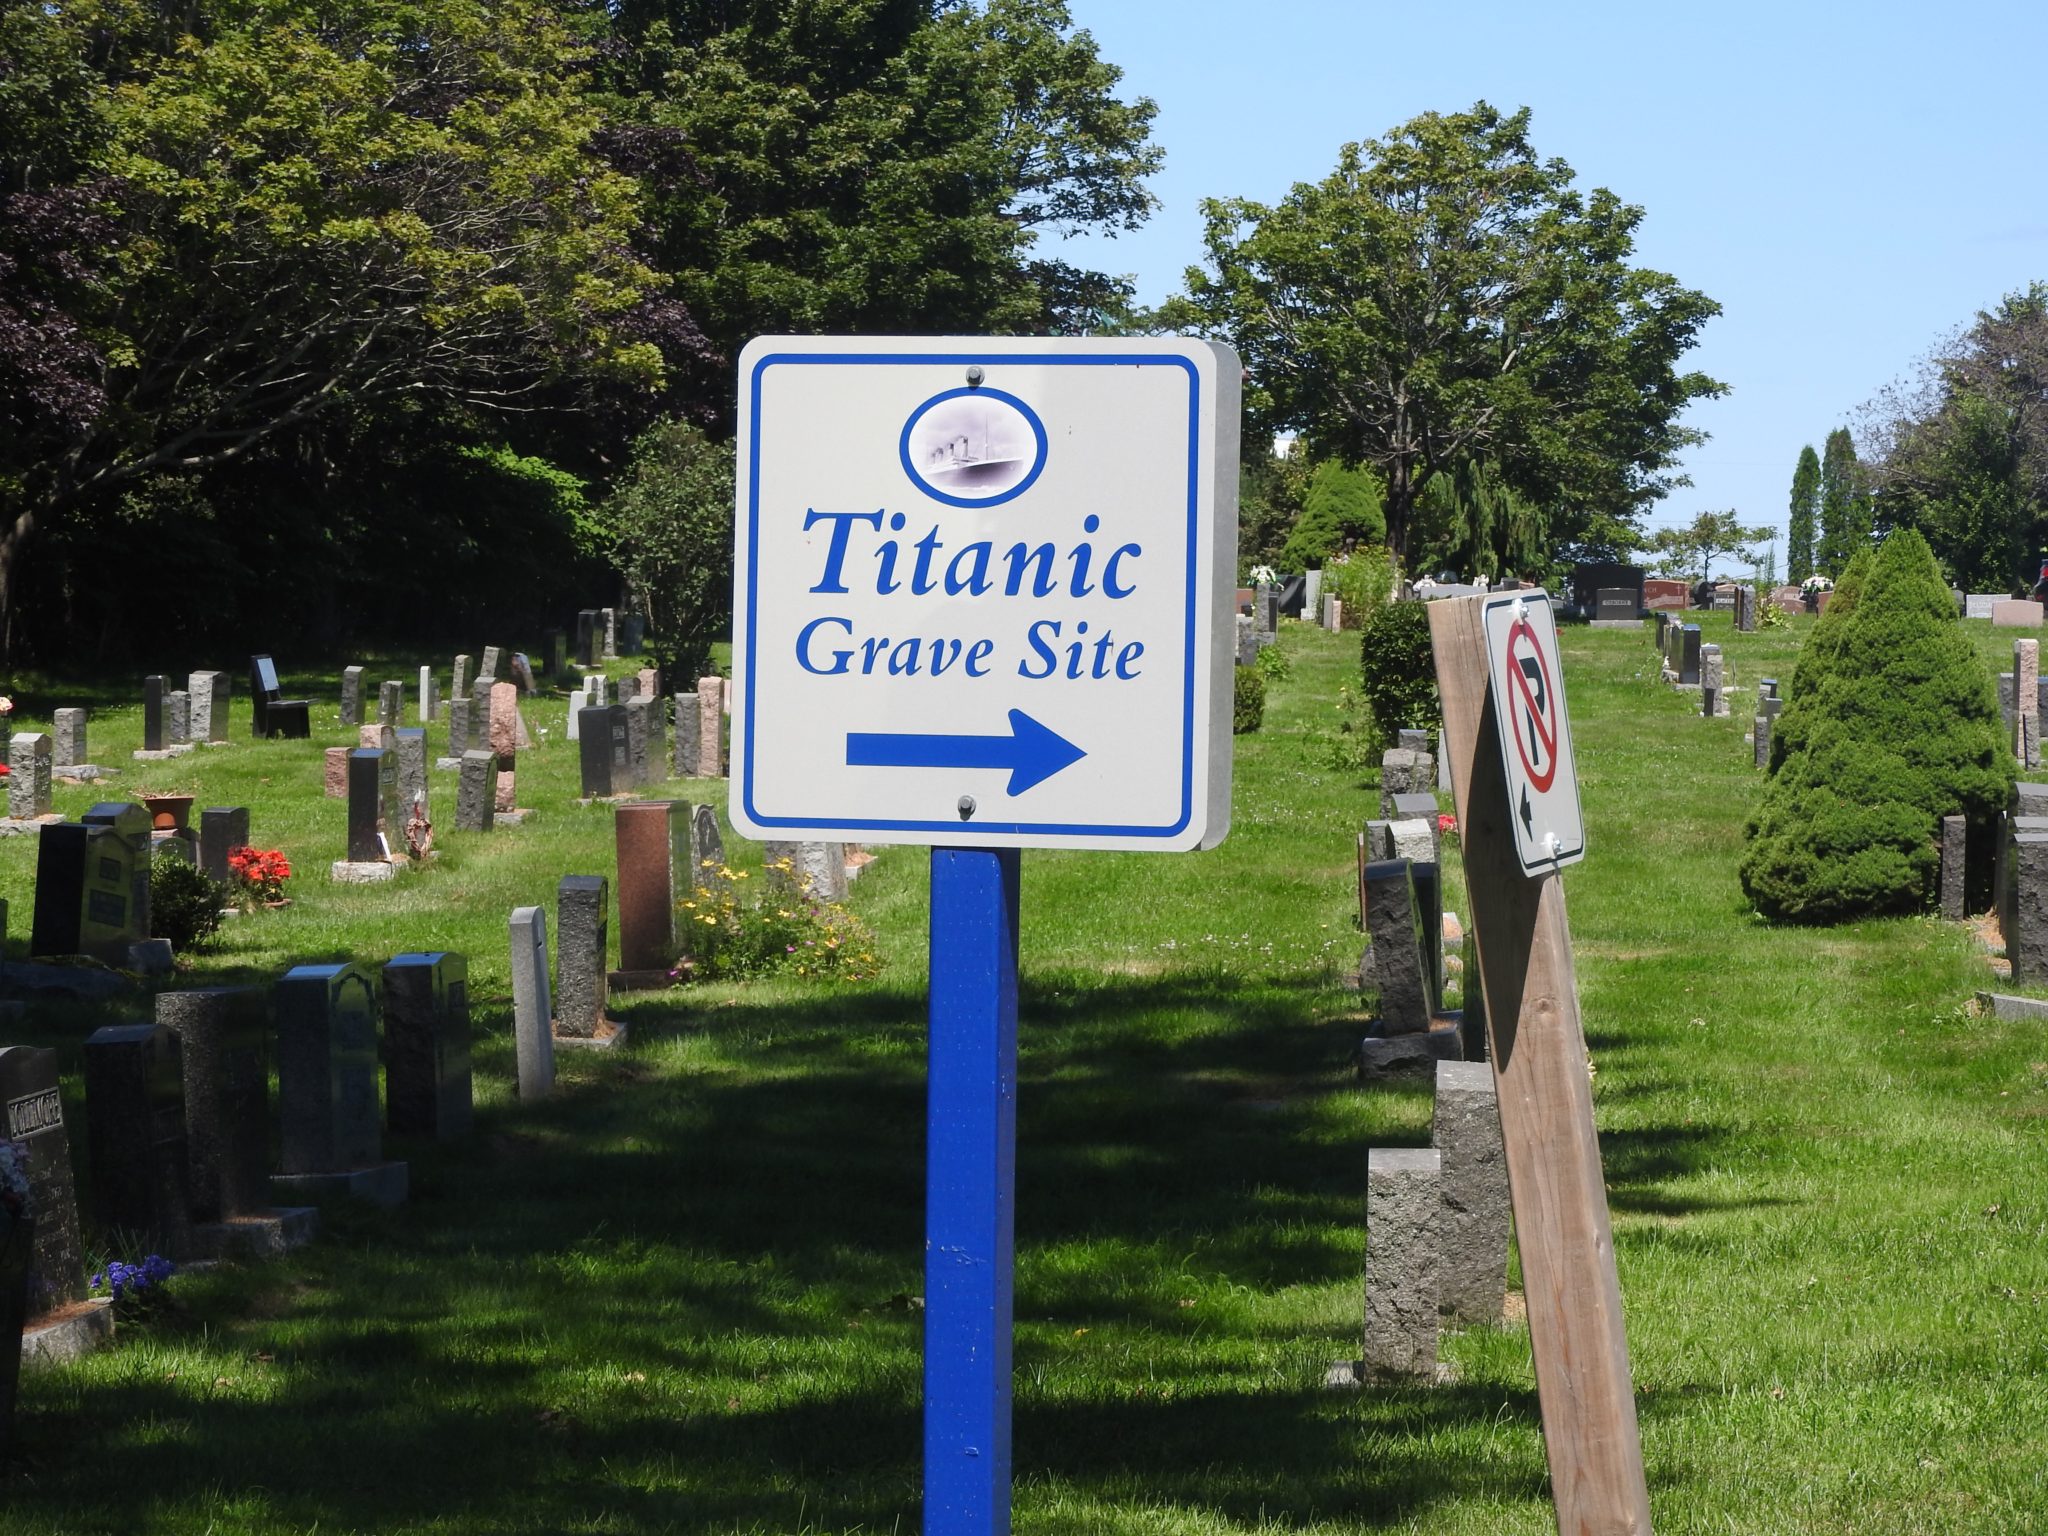 Blue & White sign indicating direction to the Titanic grave site